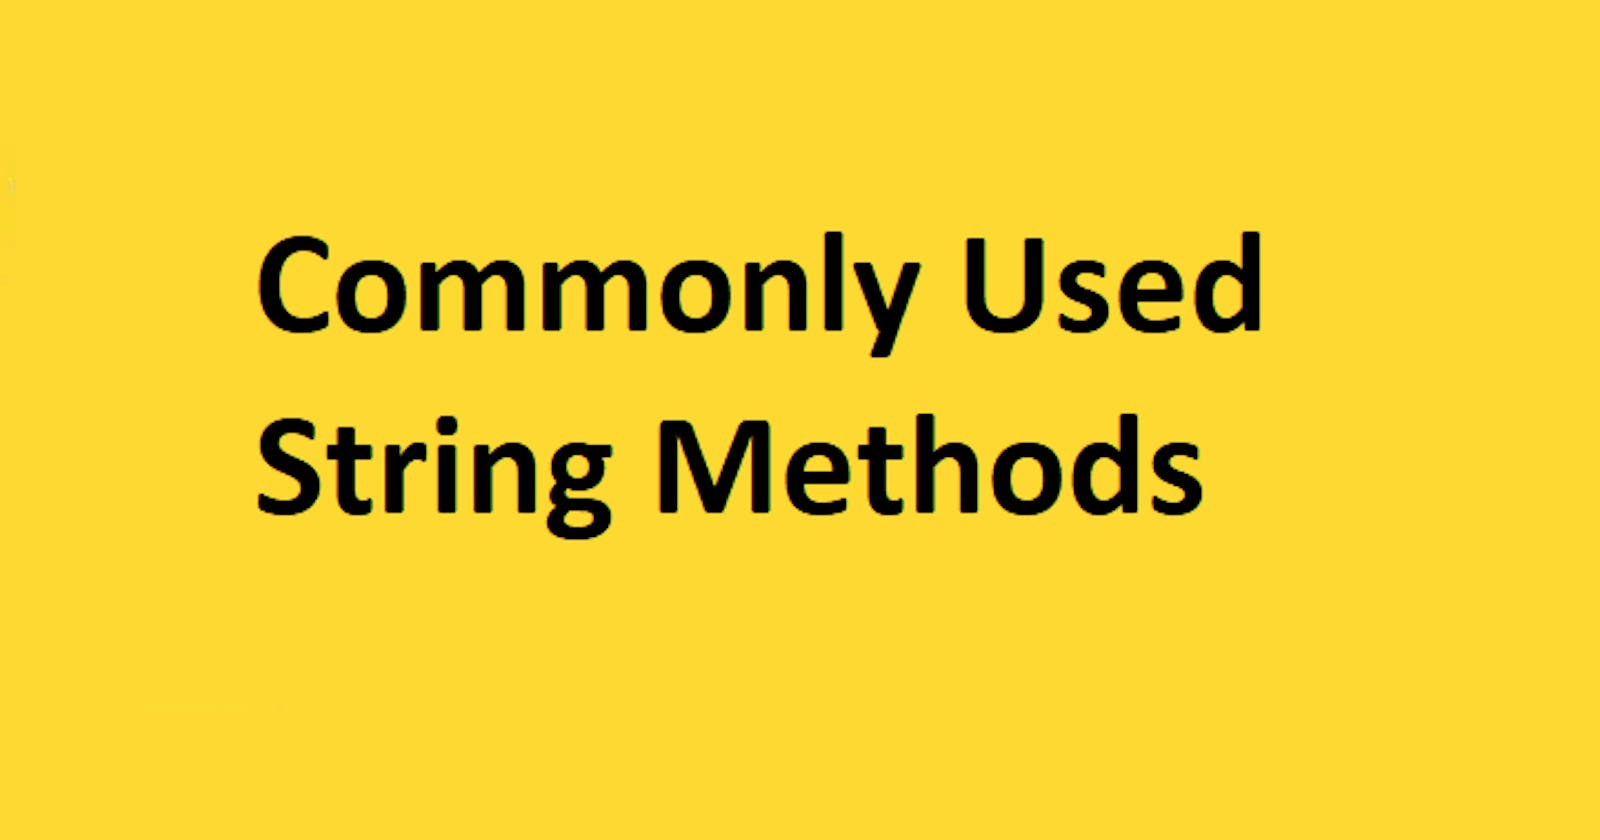 Commonly Used String Methods